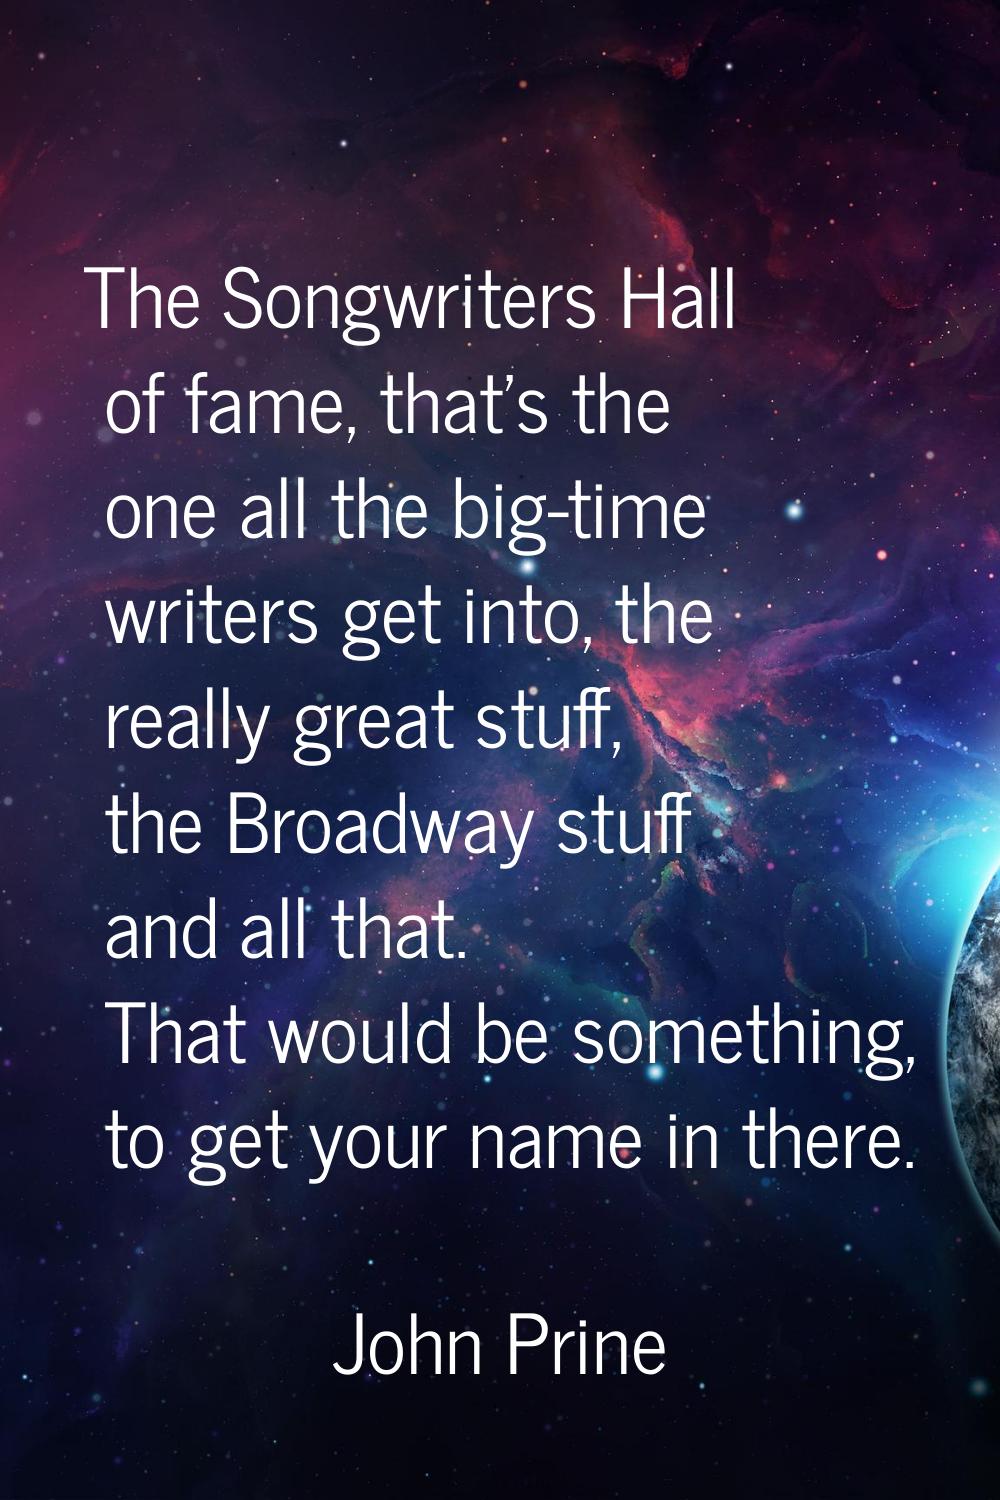 The Songwriters Hall of fame, that's the one all the big-time writers get into, the really great st